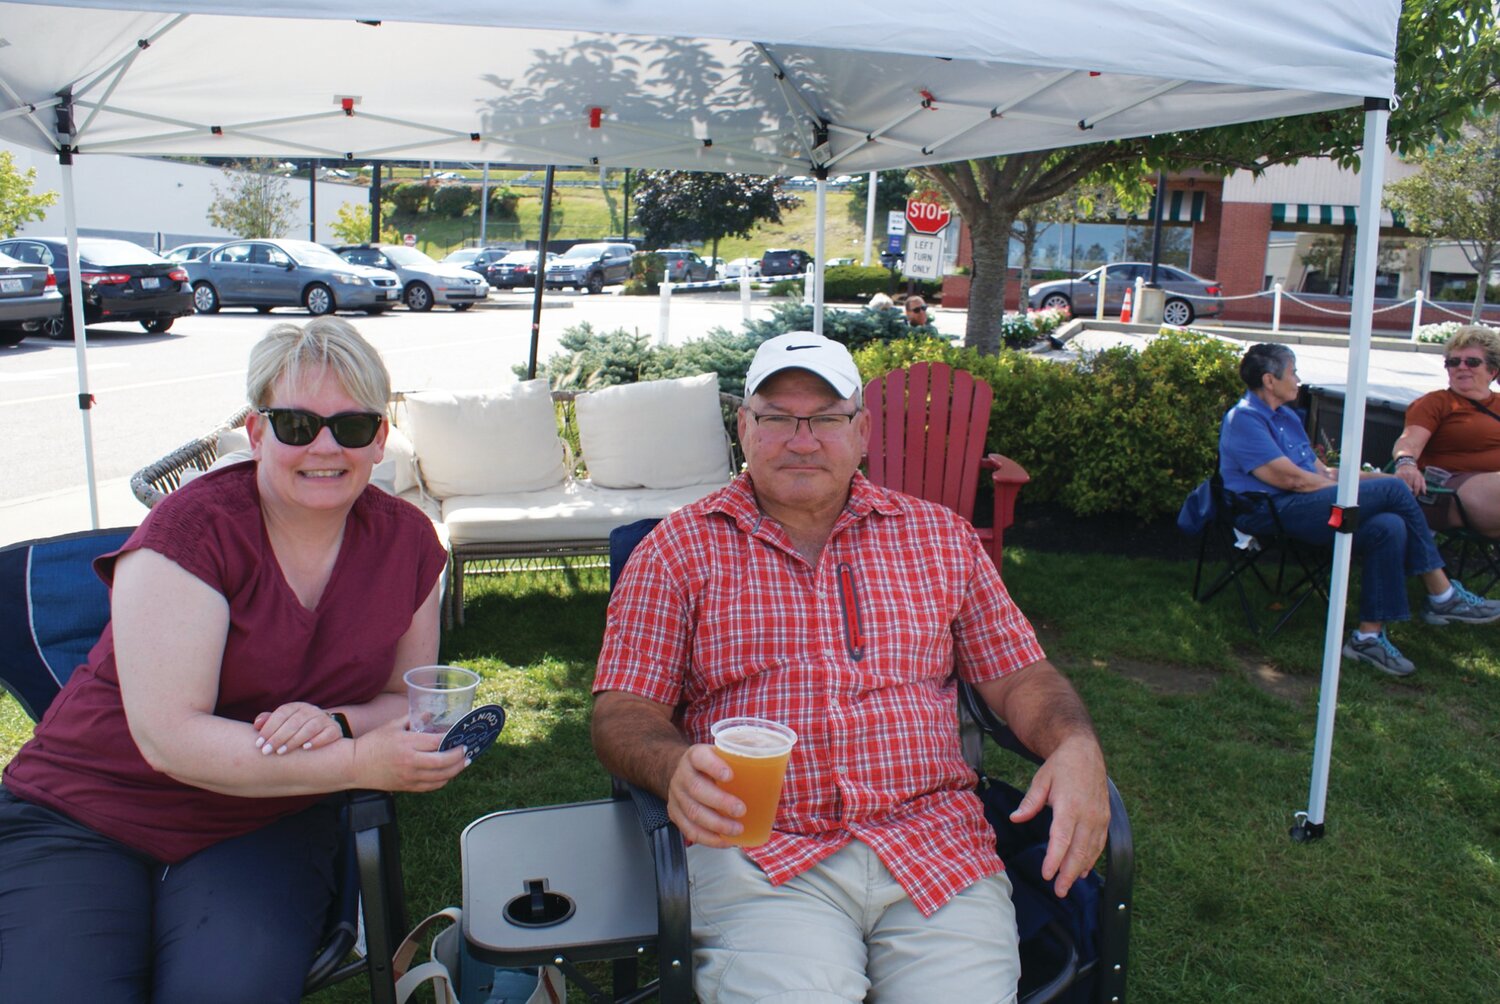 GREY SAIL SOLD: Lynn and Jon relax with some drinks and listen to music from a shady spot at the Garden City Beer Fest.